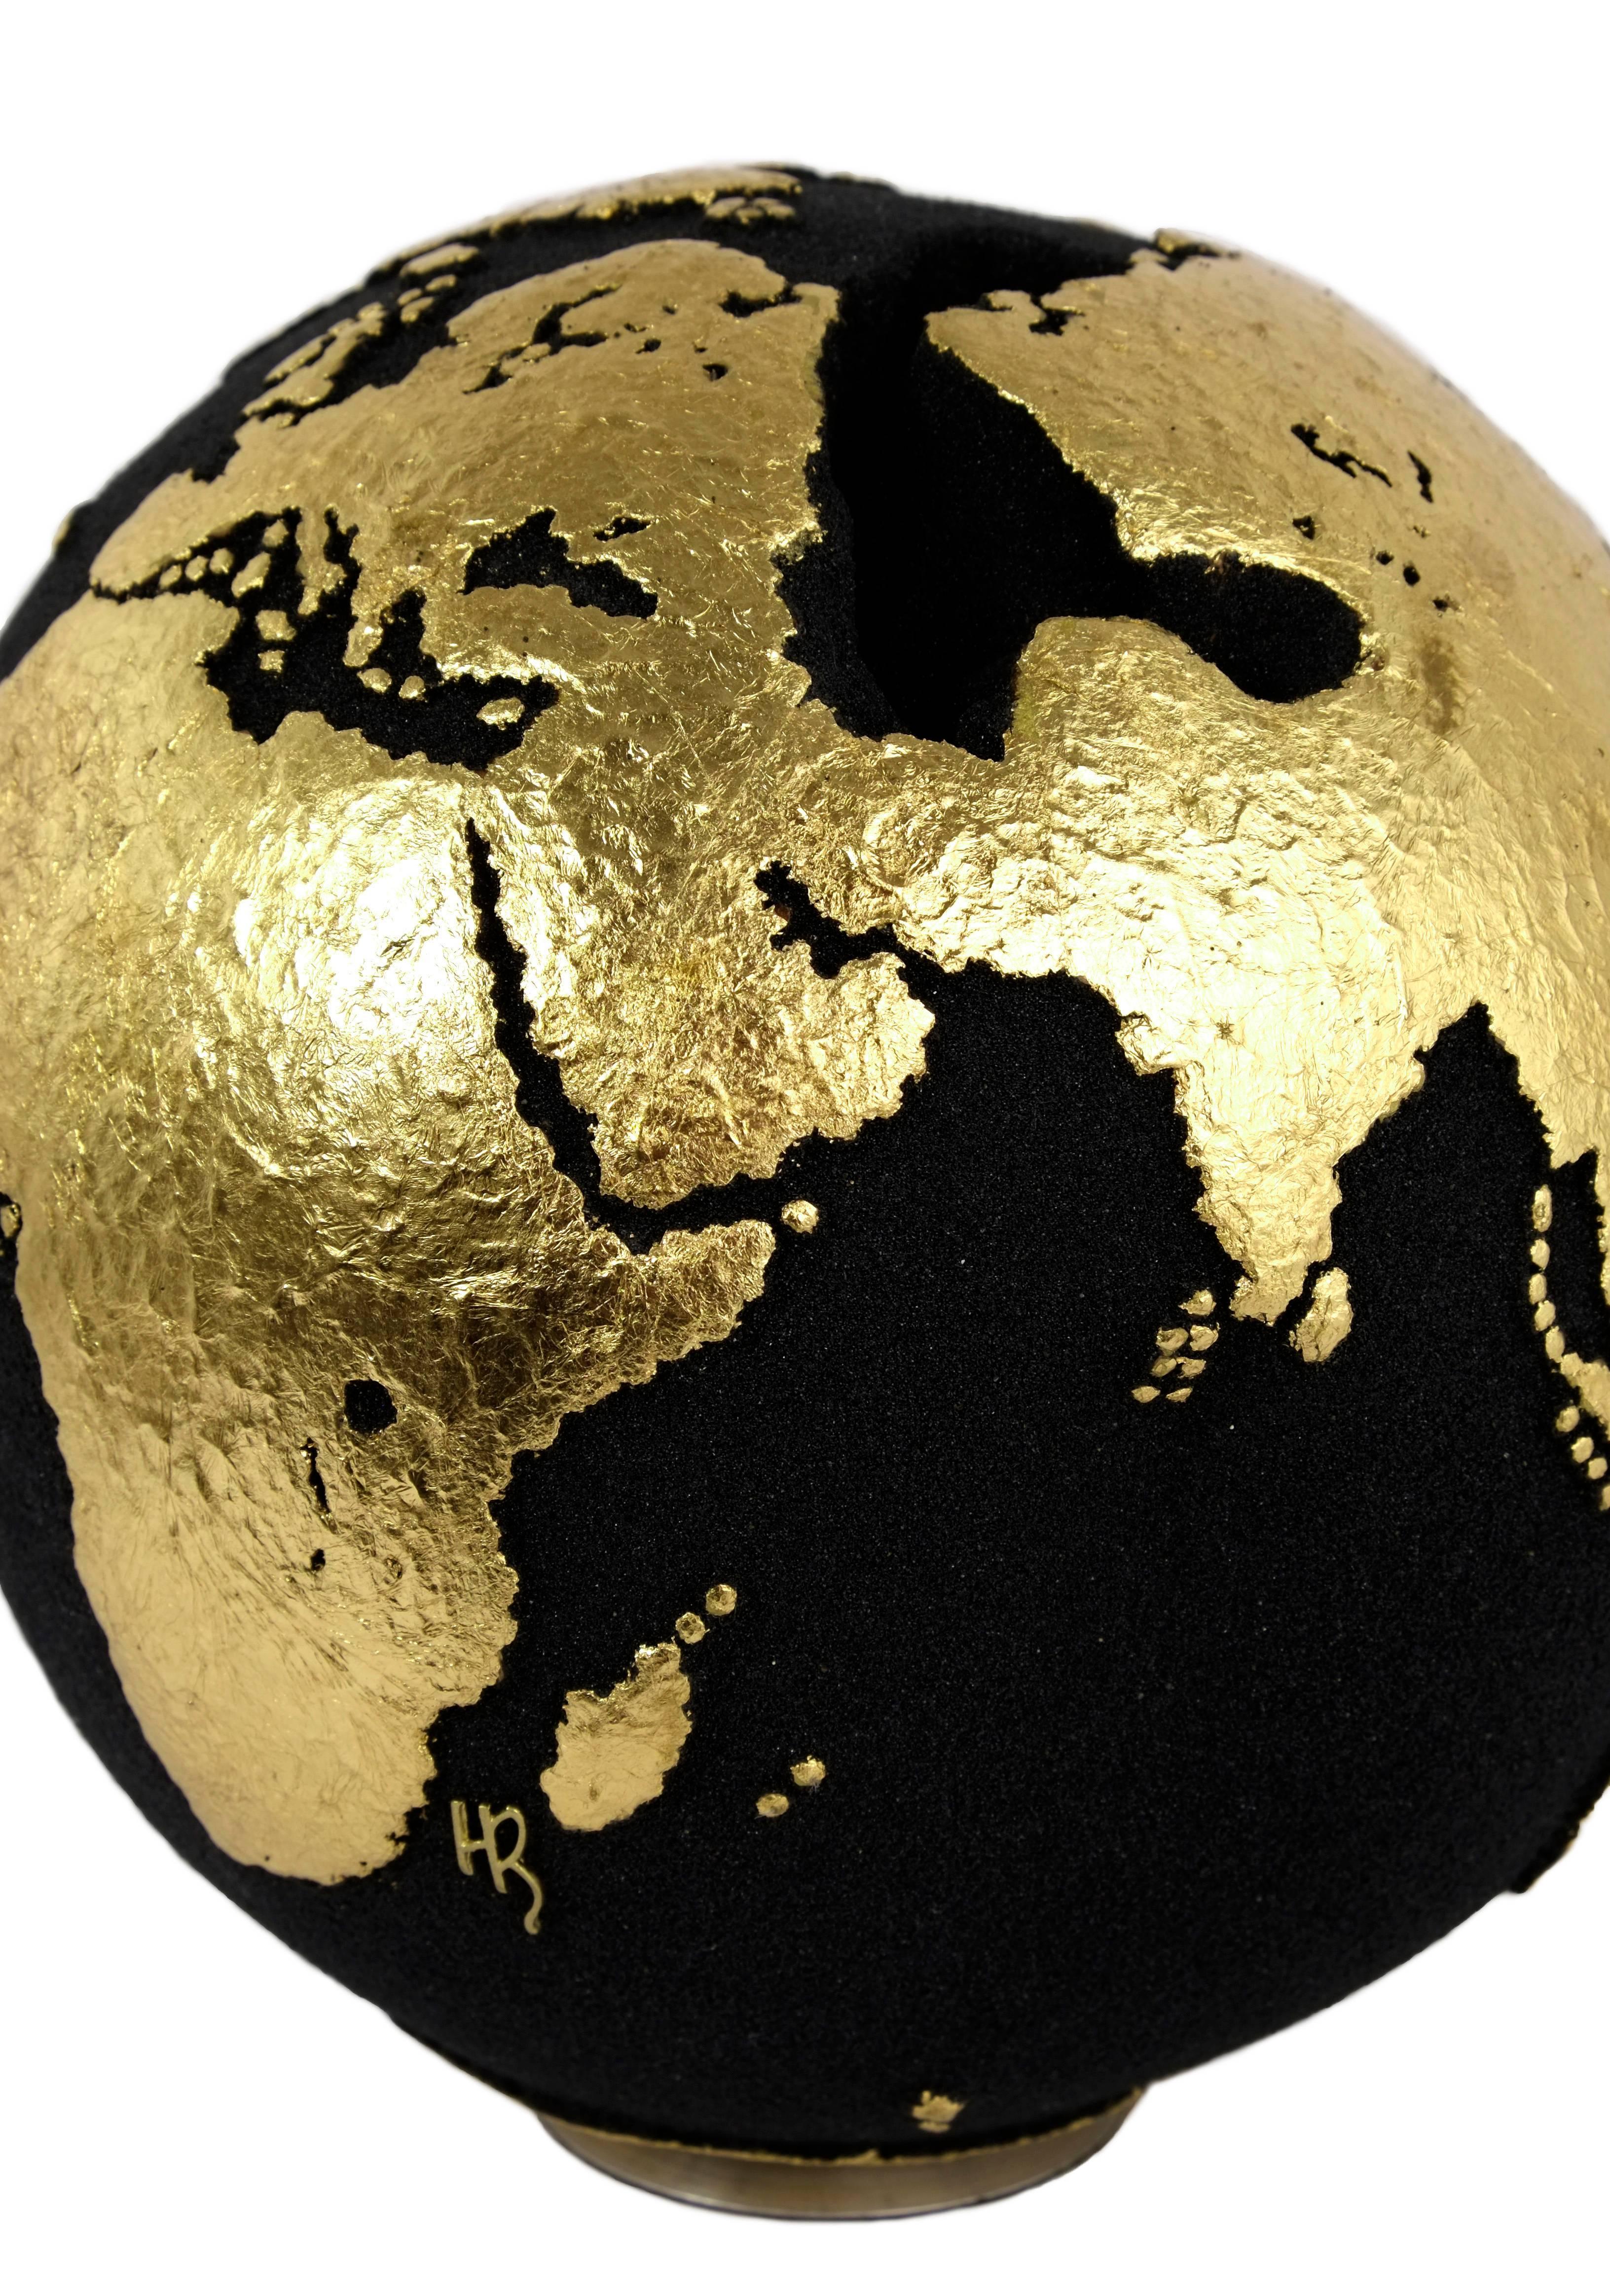 Balinese Classic Globe with Volcanic Sand and Gold Finishing, 20cm